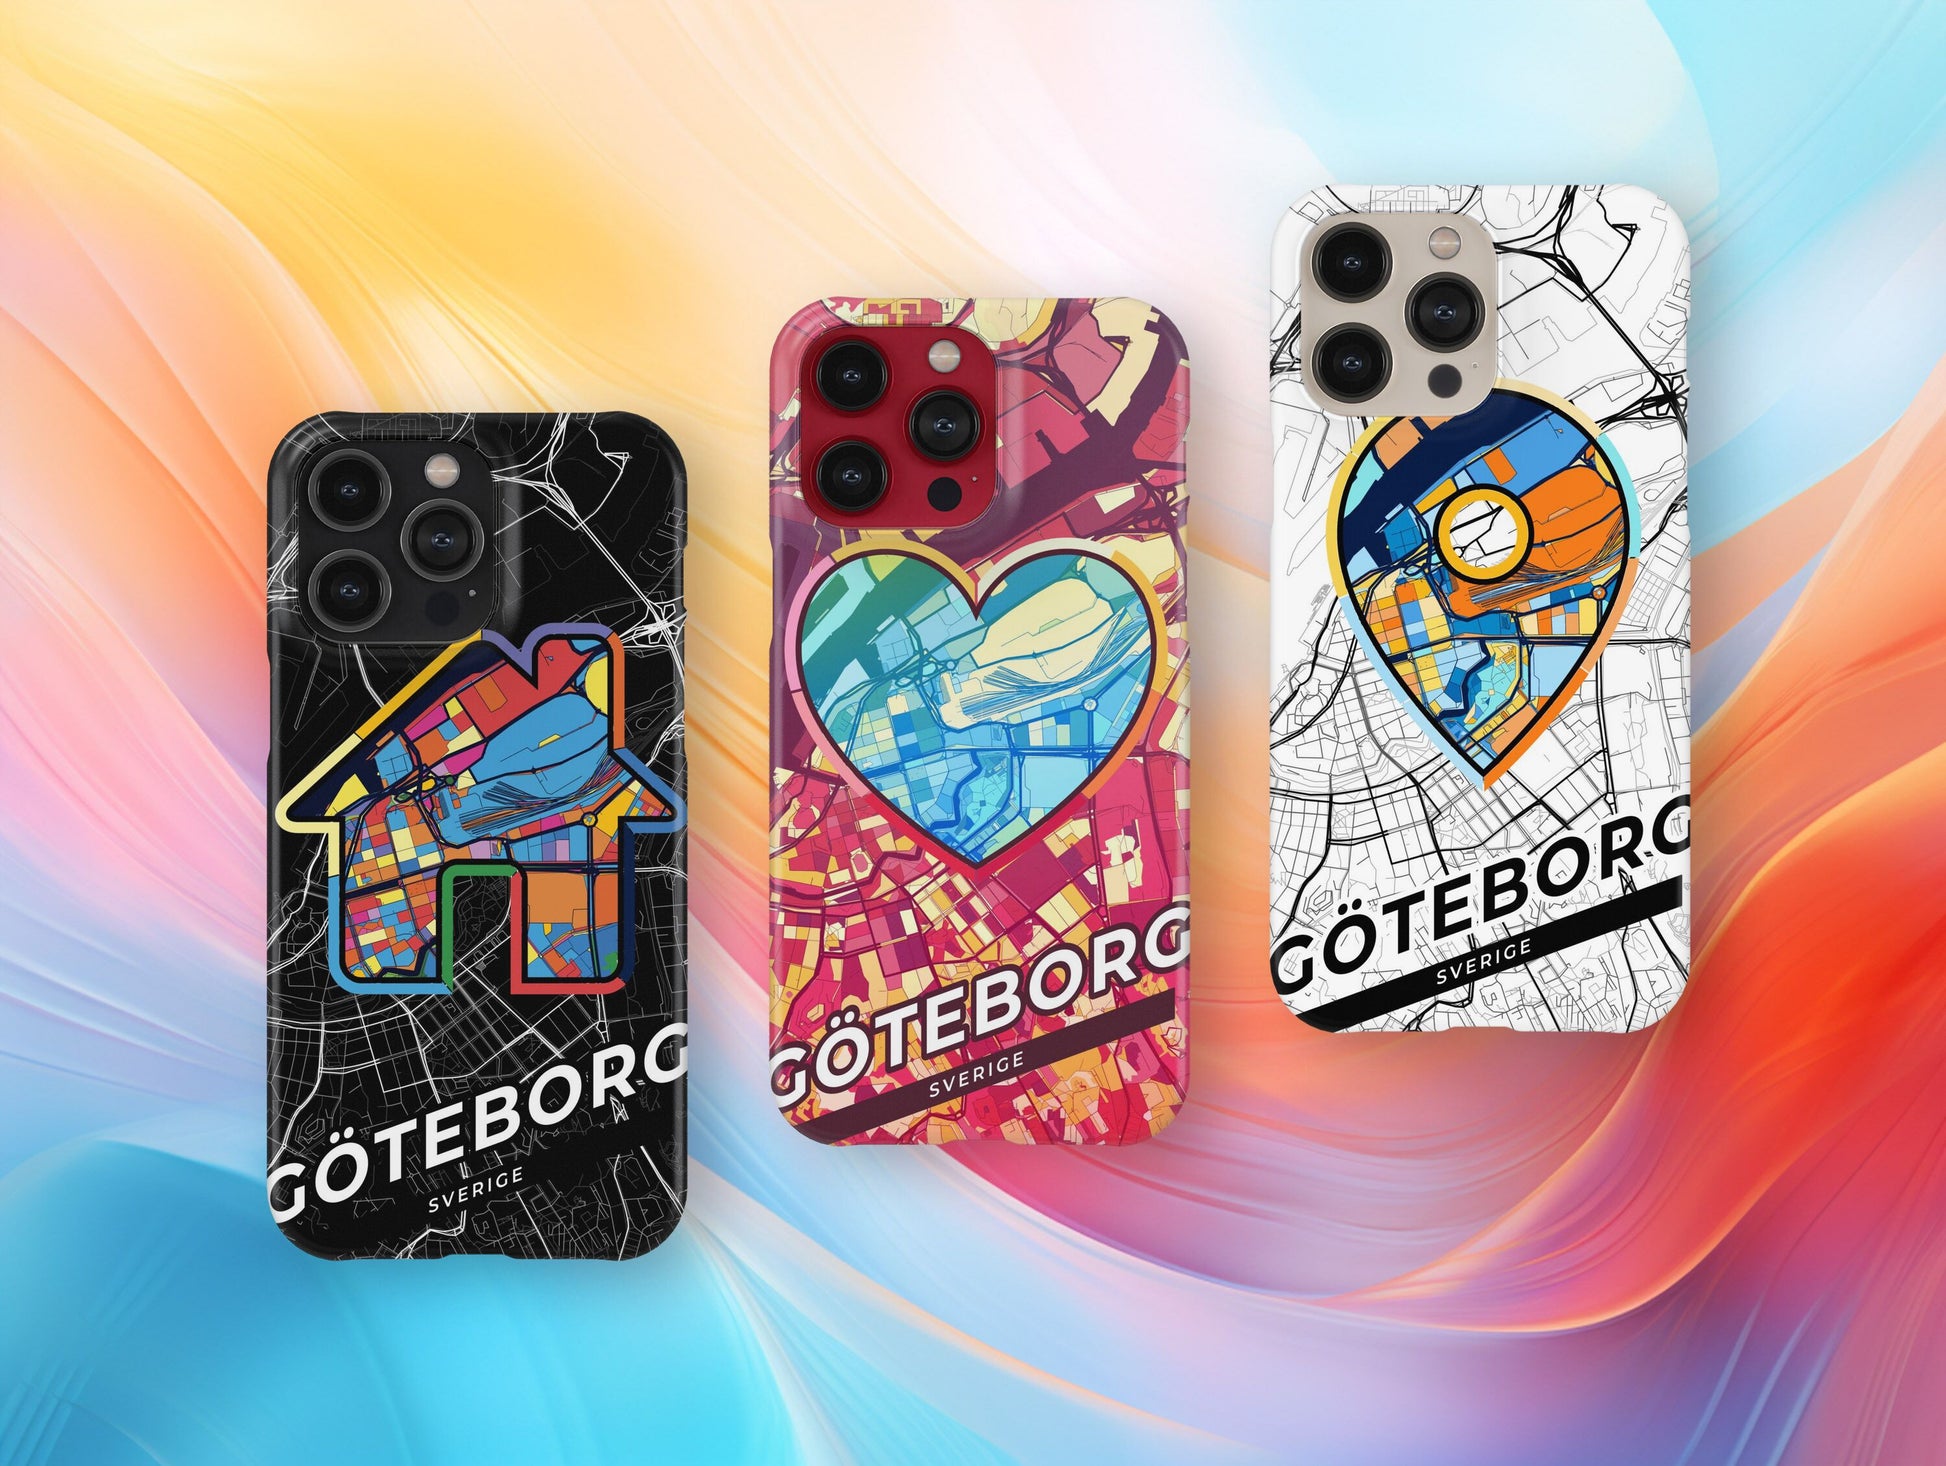 Gothenburg Sweden slim phone case with colorful icon. Birthday, wedding or housewarming gift. Couple match cases.